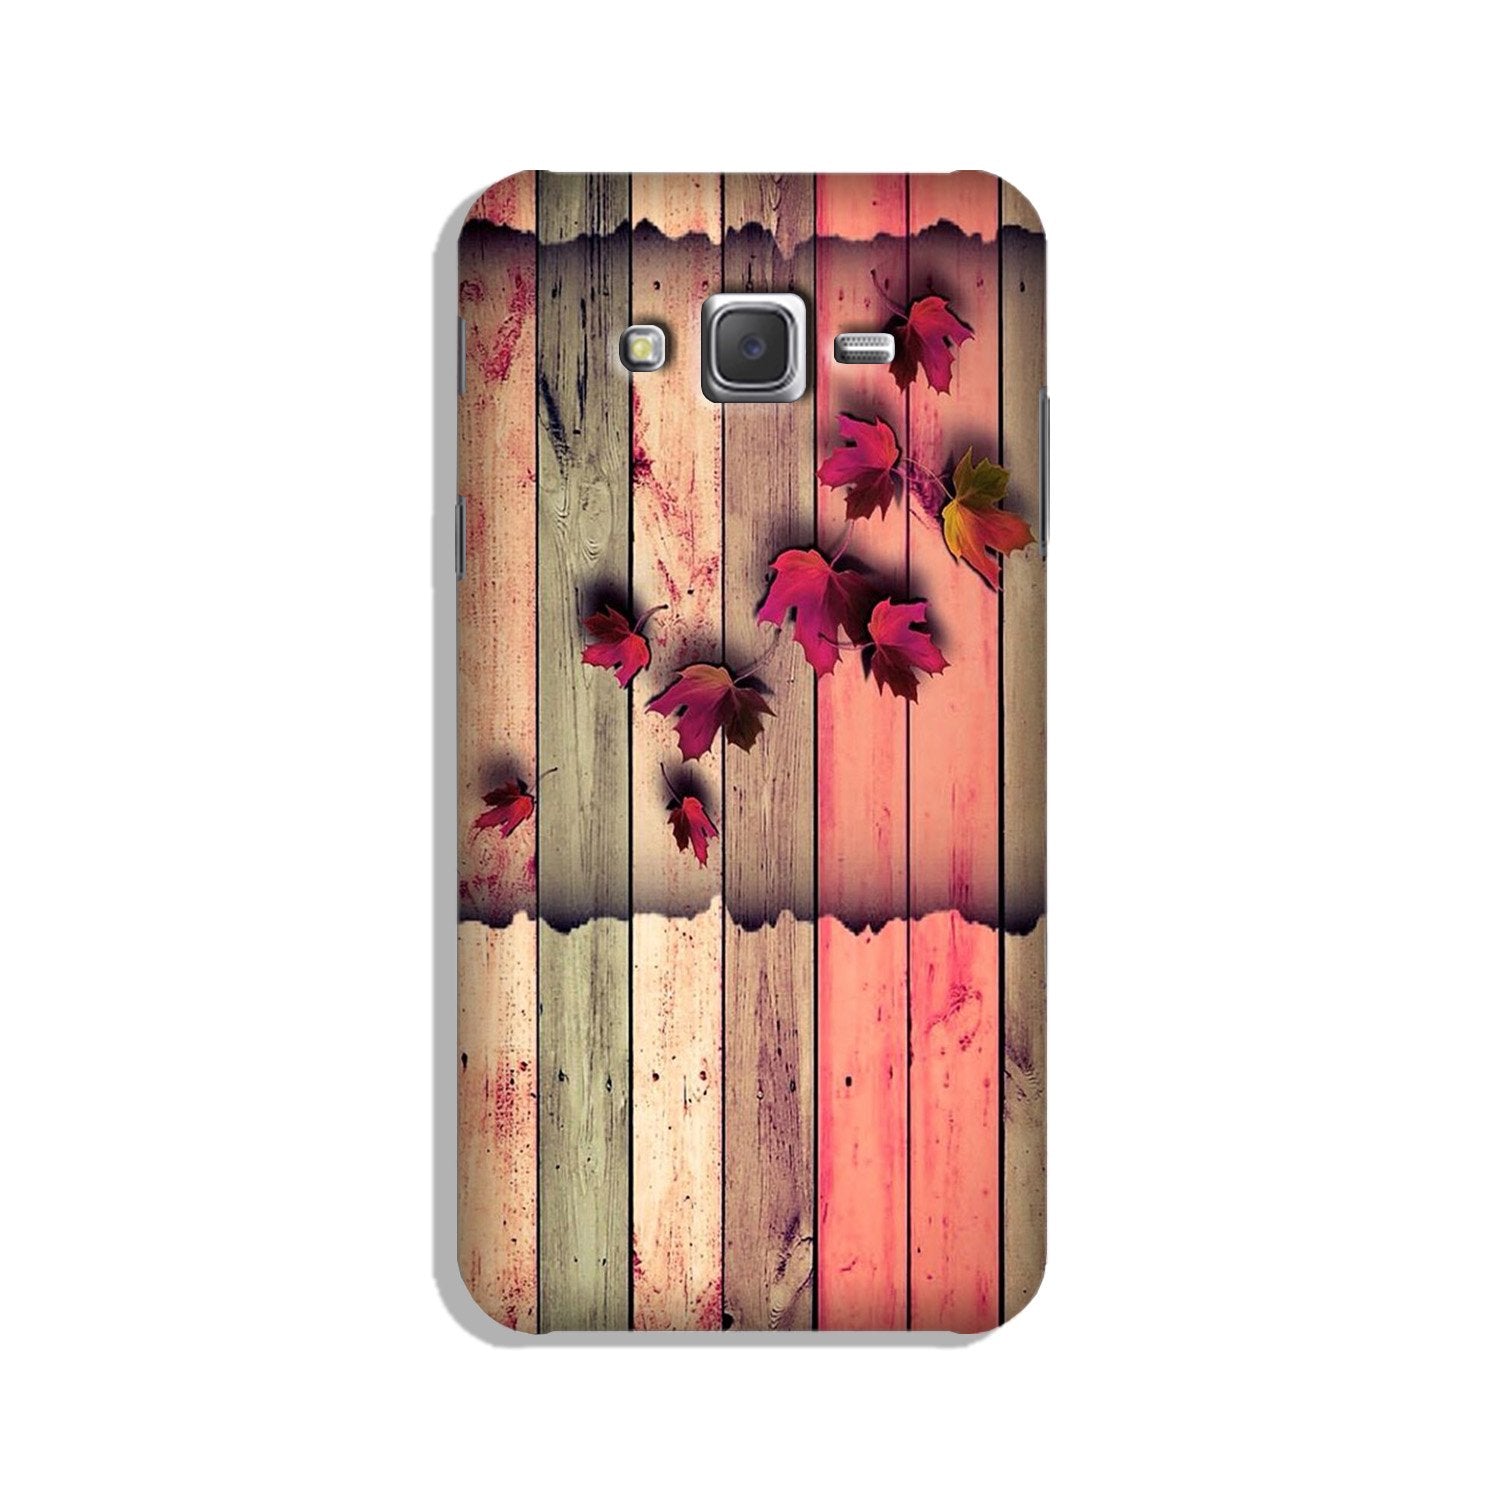 Wooden look2 Case for Galaxy J3 (2015)